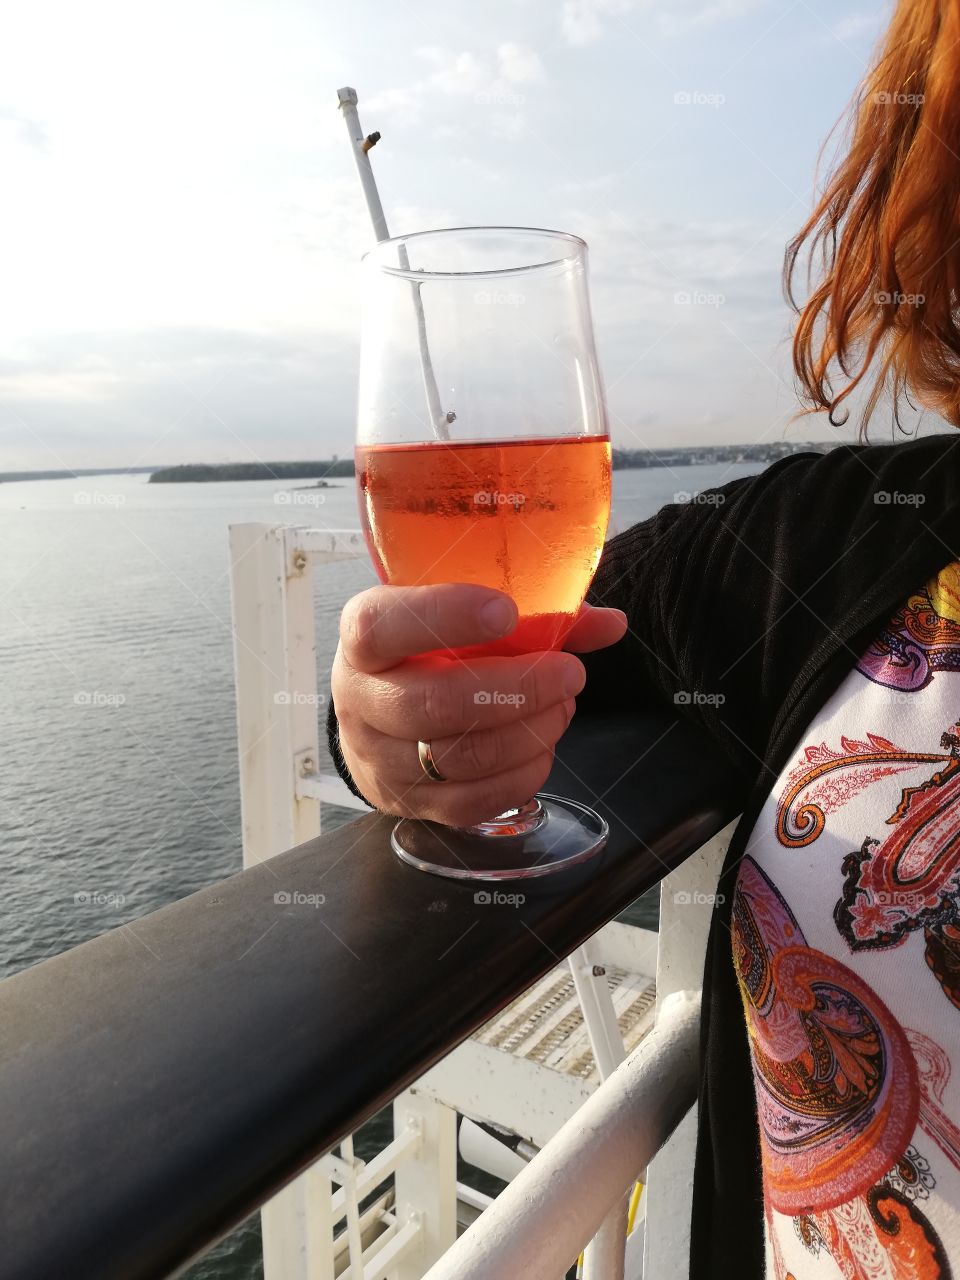 A red haired person is standing on the deck of a passenger ship and leaning on the black railing. She has an orange drink in her hand, a golden ring in her finger, wearing a jersey and a multicoloured shirt.